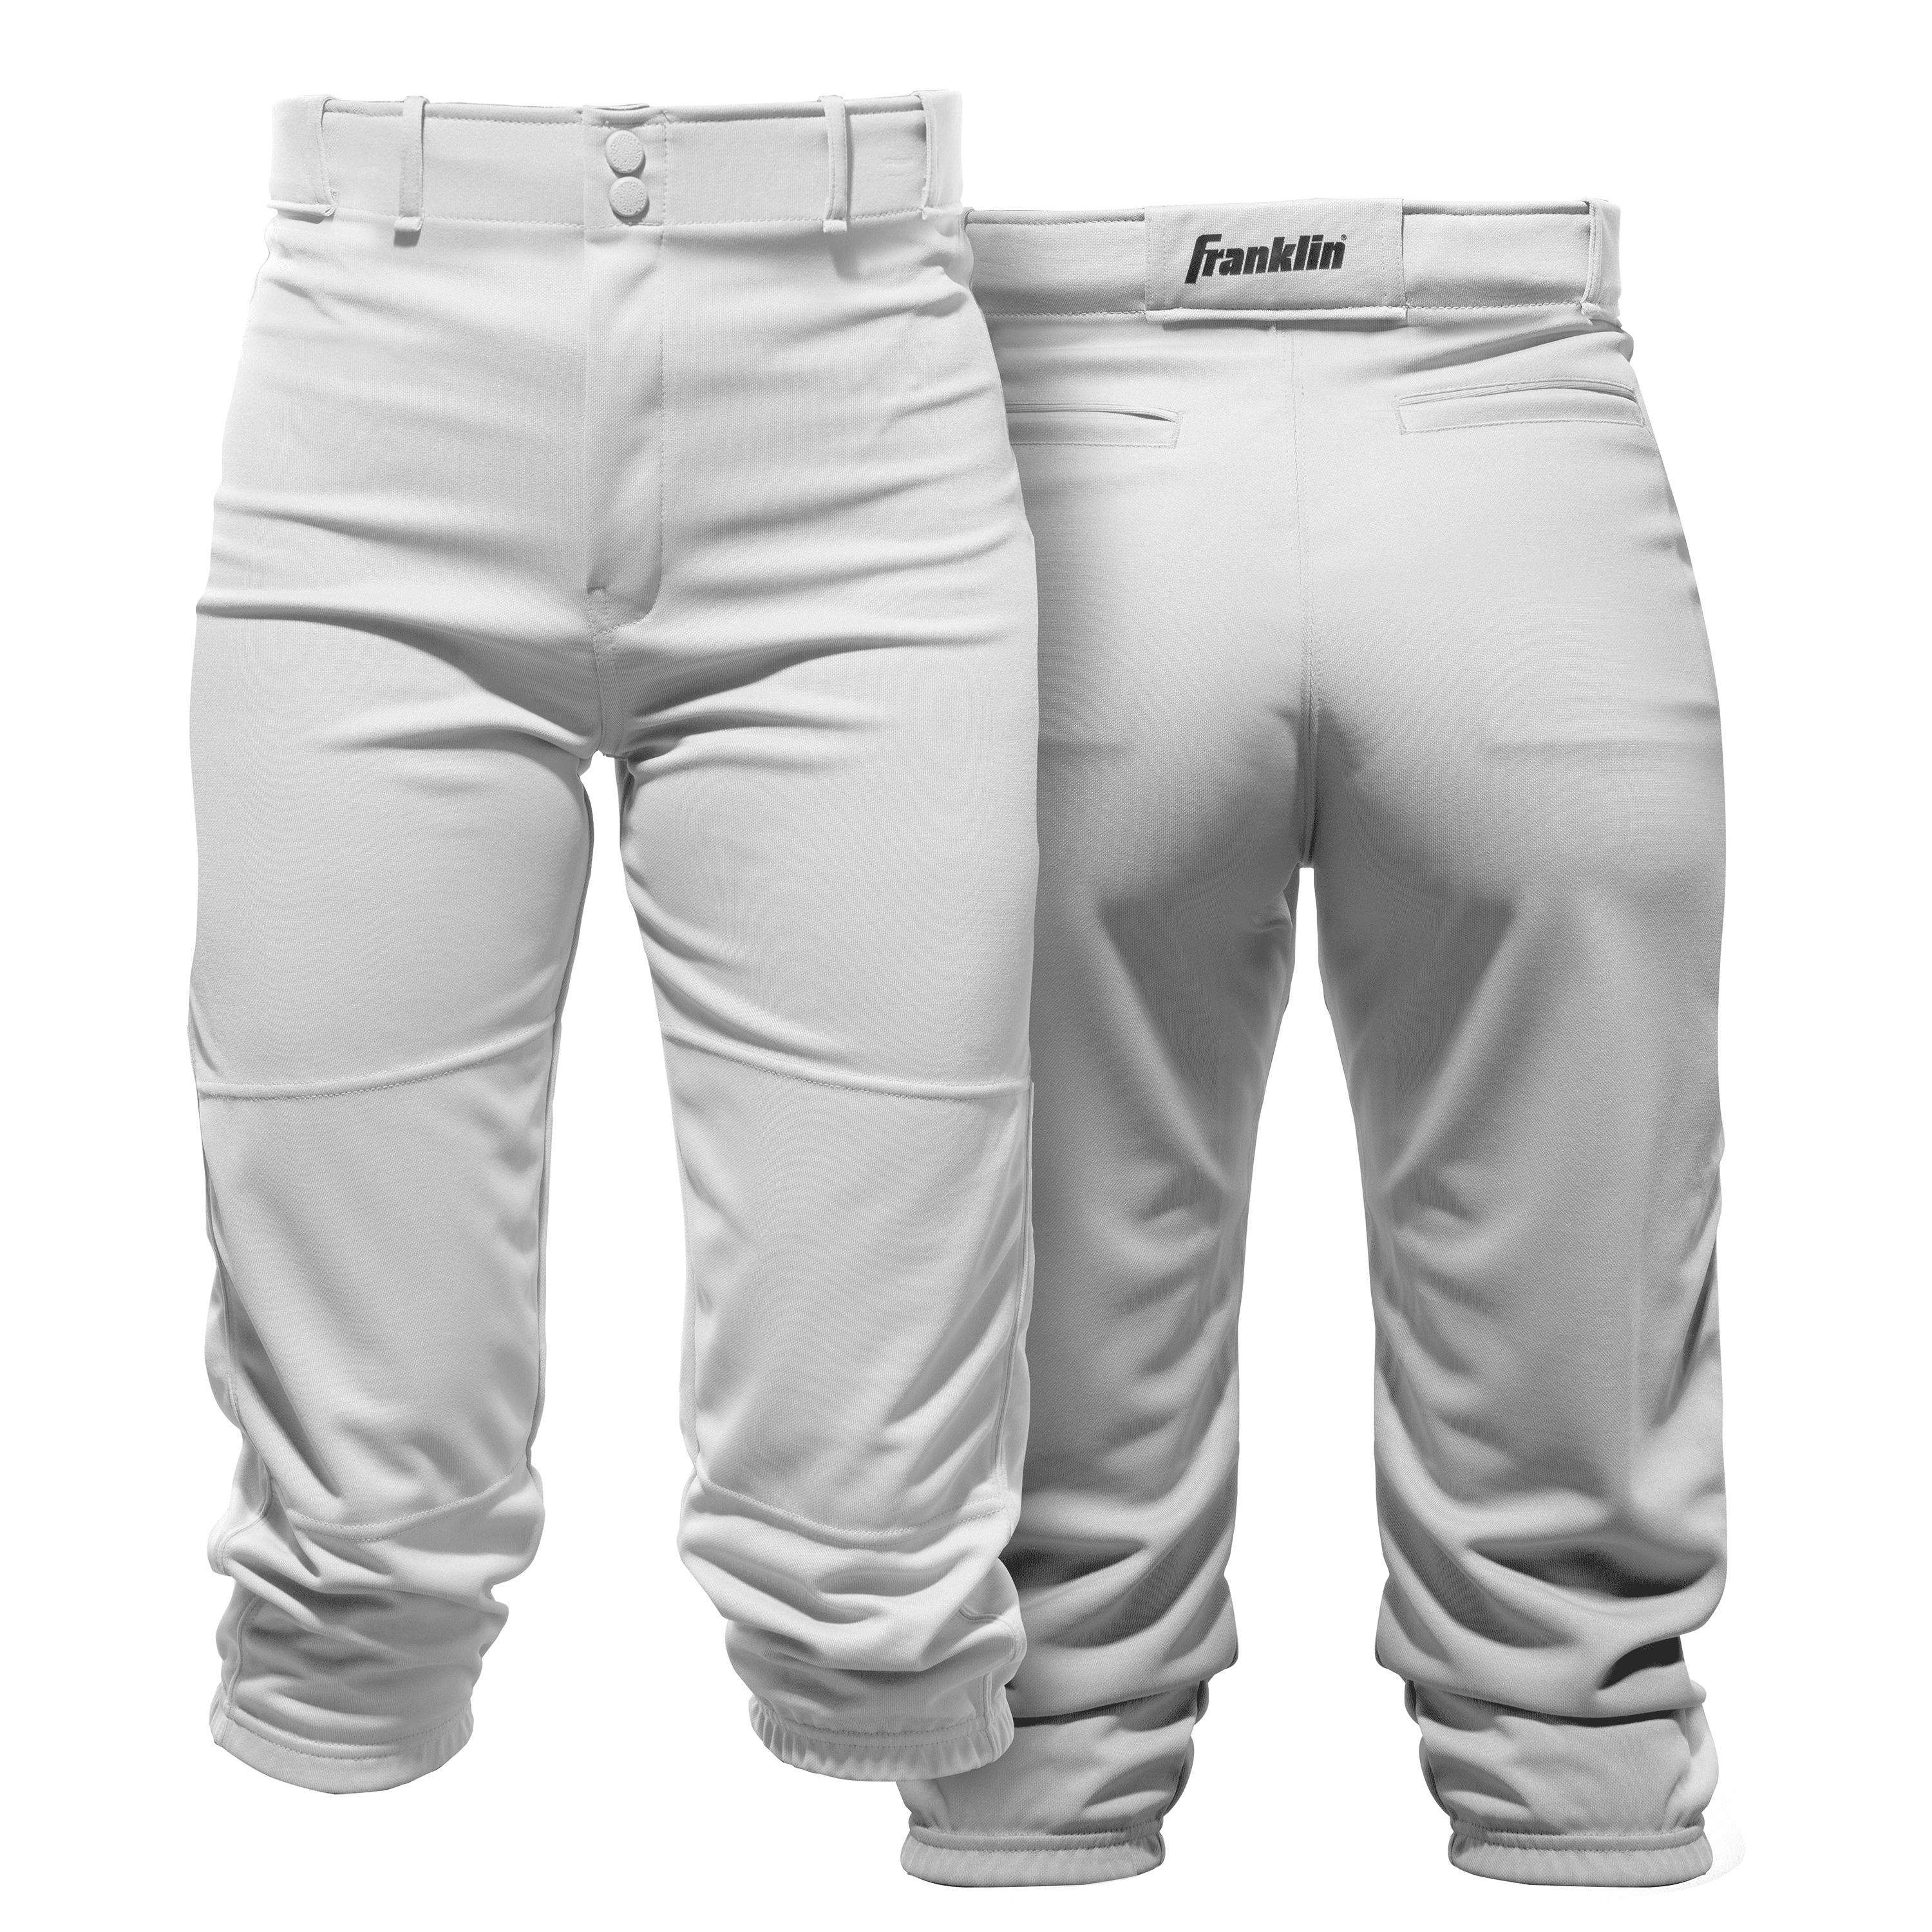 Russell Adult Men's Baseball Pants w Side Piping Sale $14.99 Was $29.95 